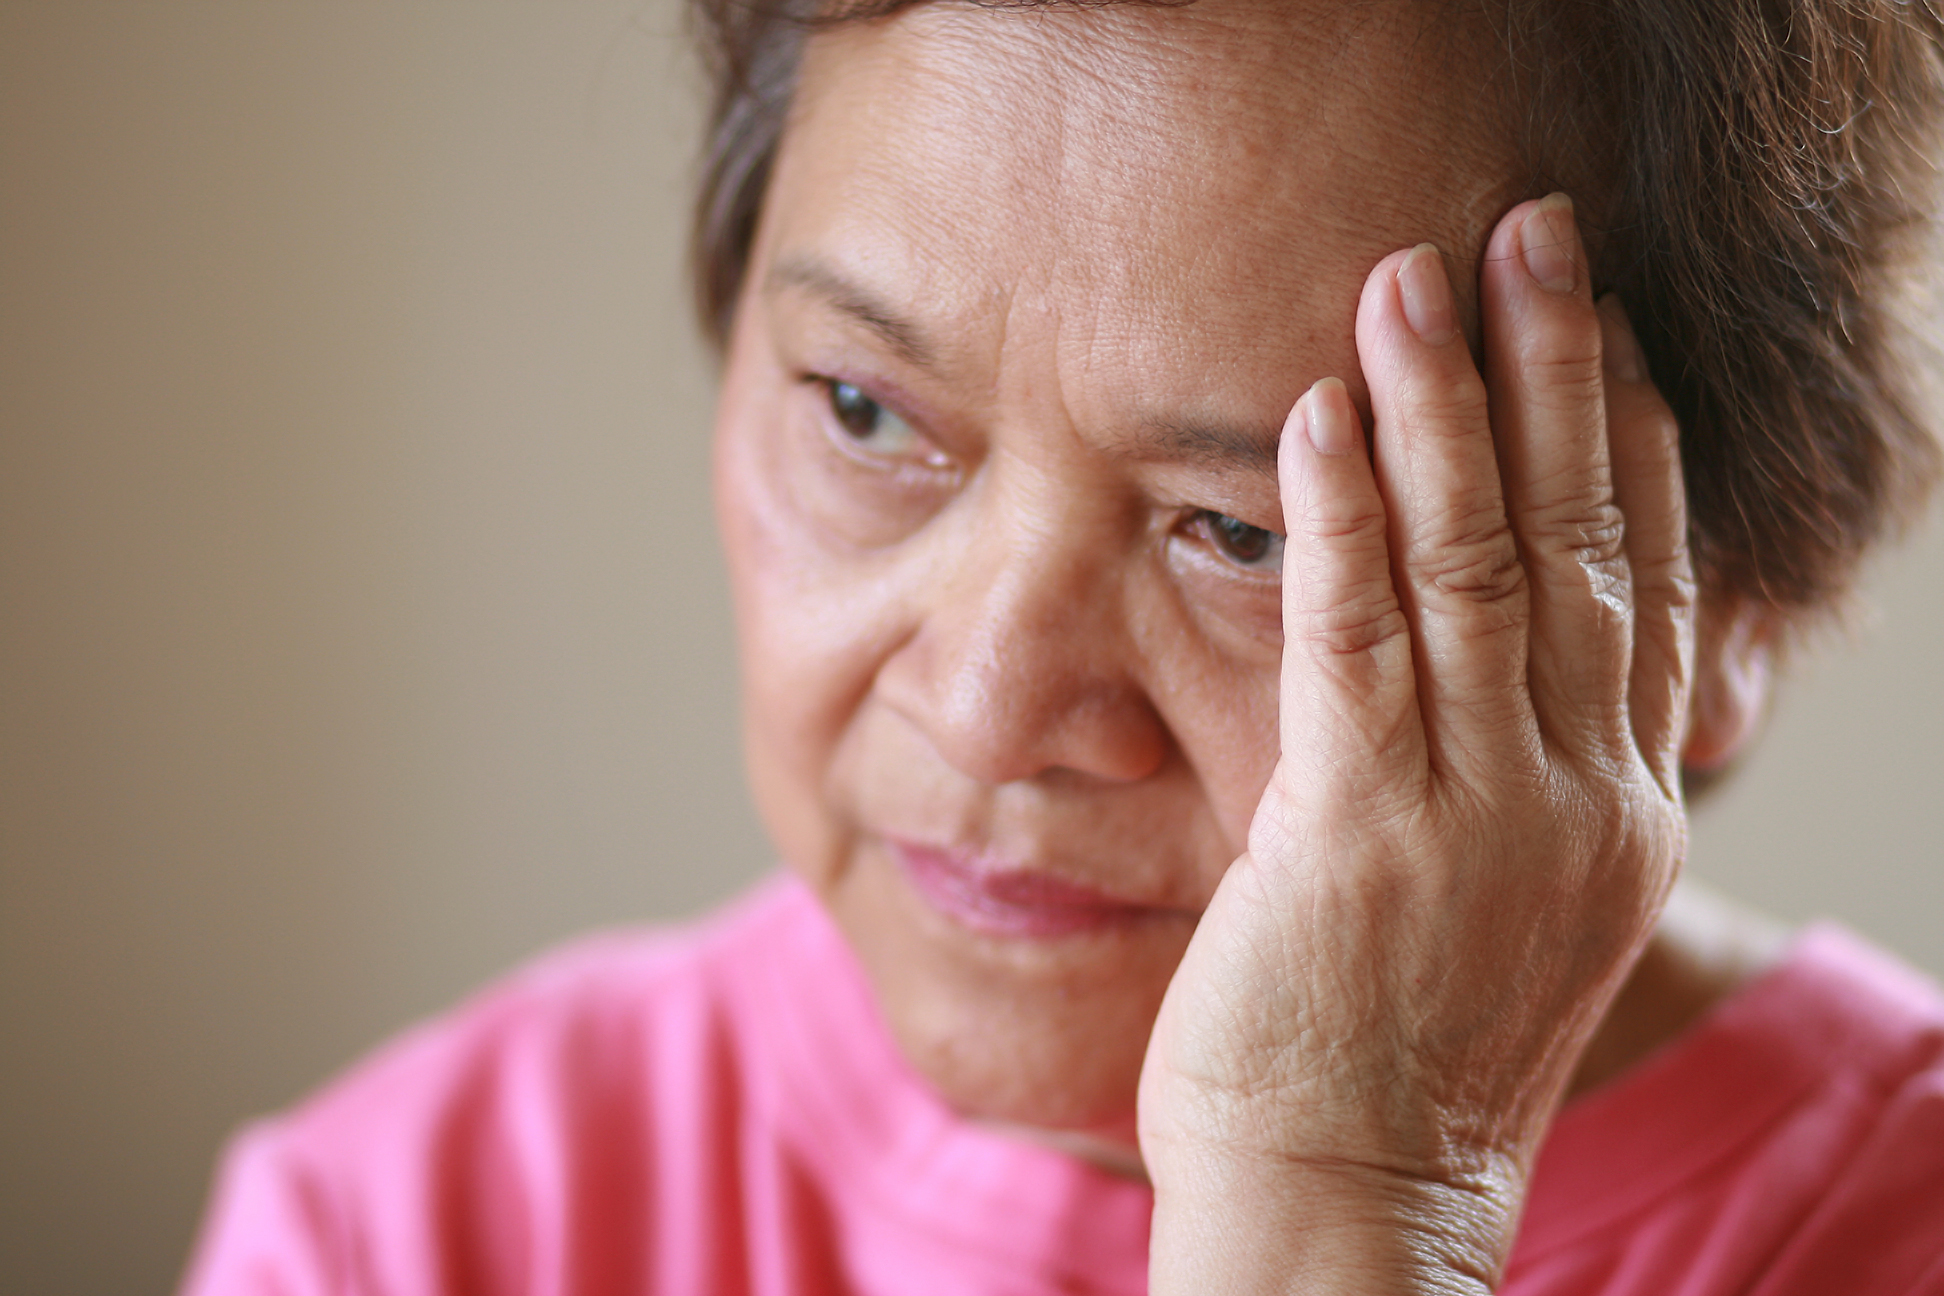 Do You Know the Signs of Elder Abuse?